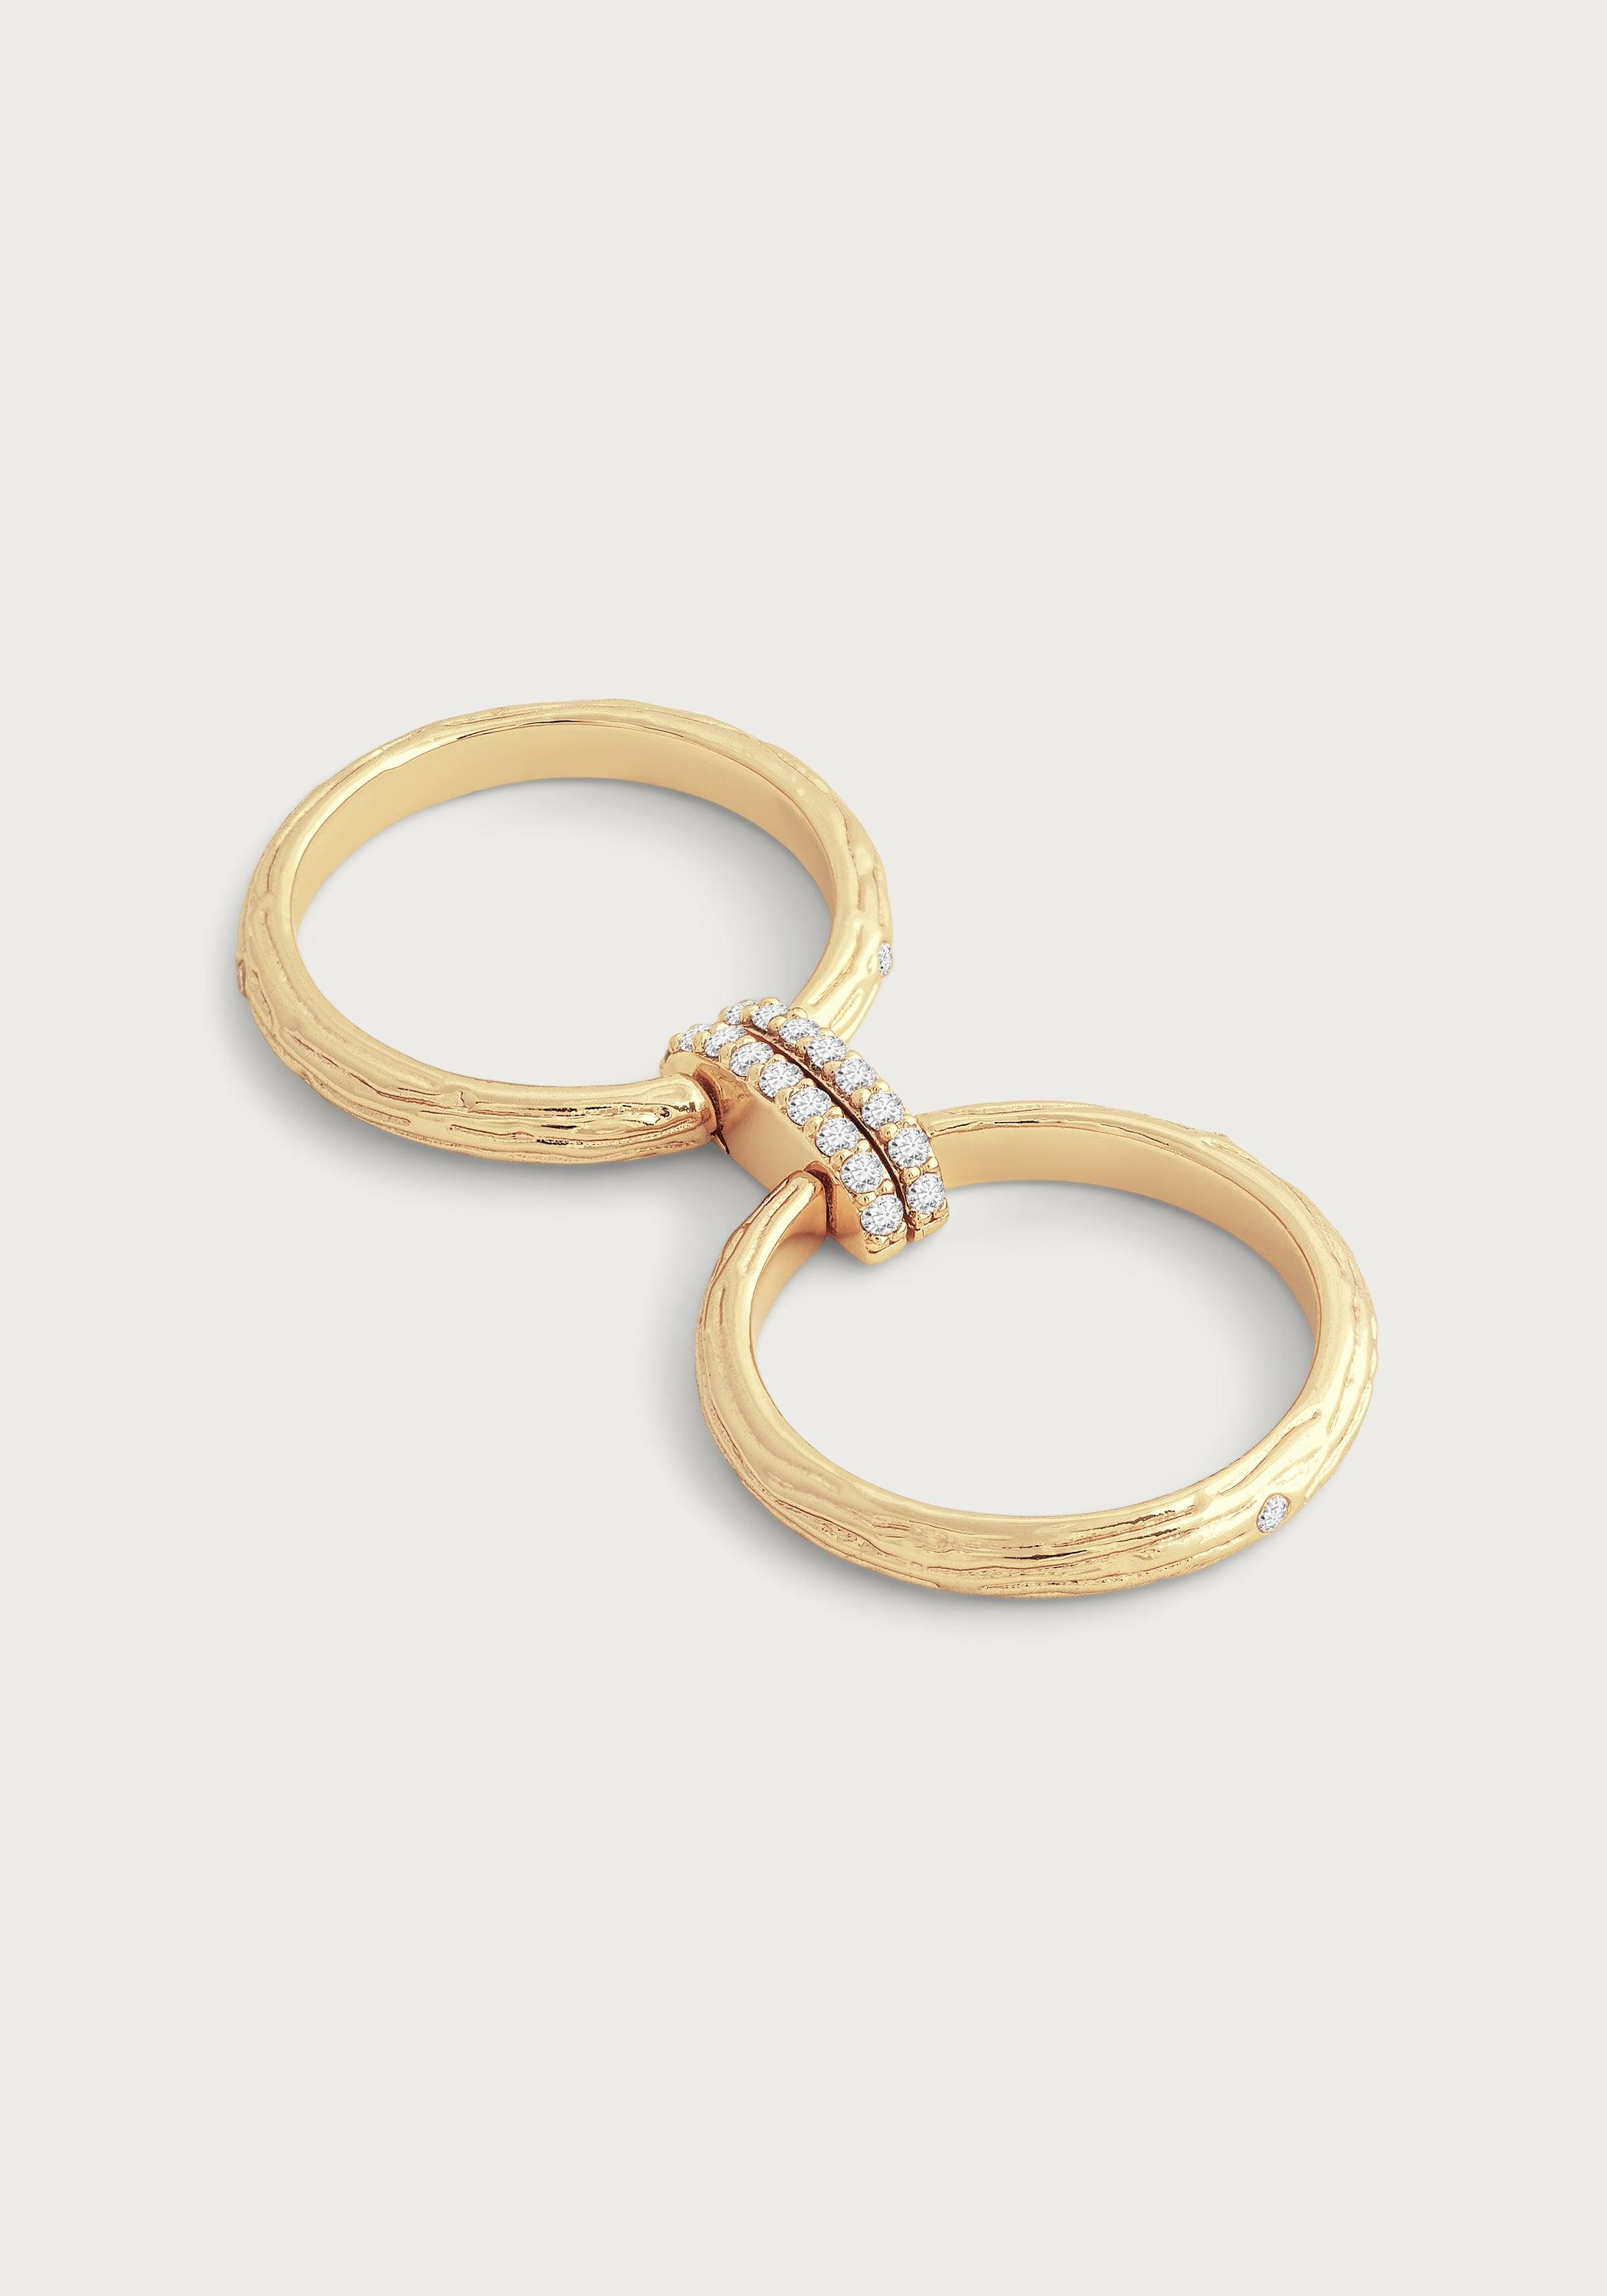 Enchanted Forest Chain Double Ring - Anabel Aram